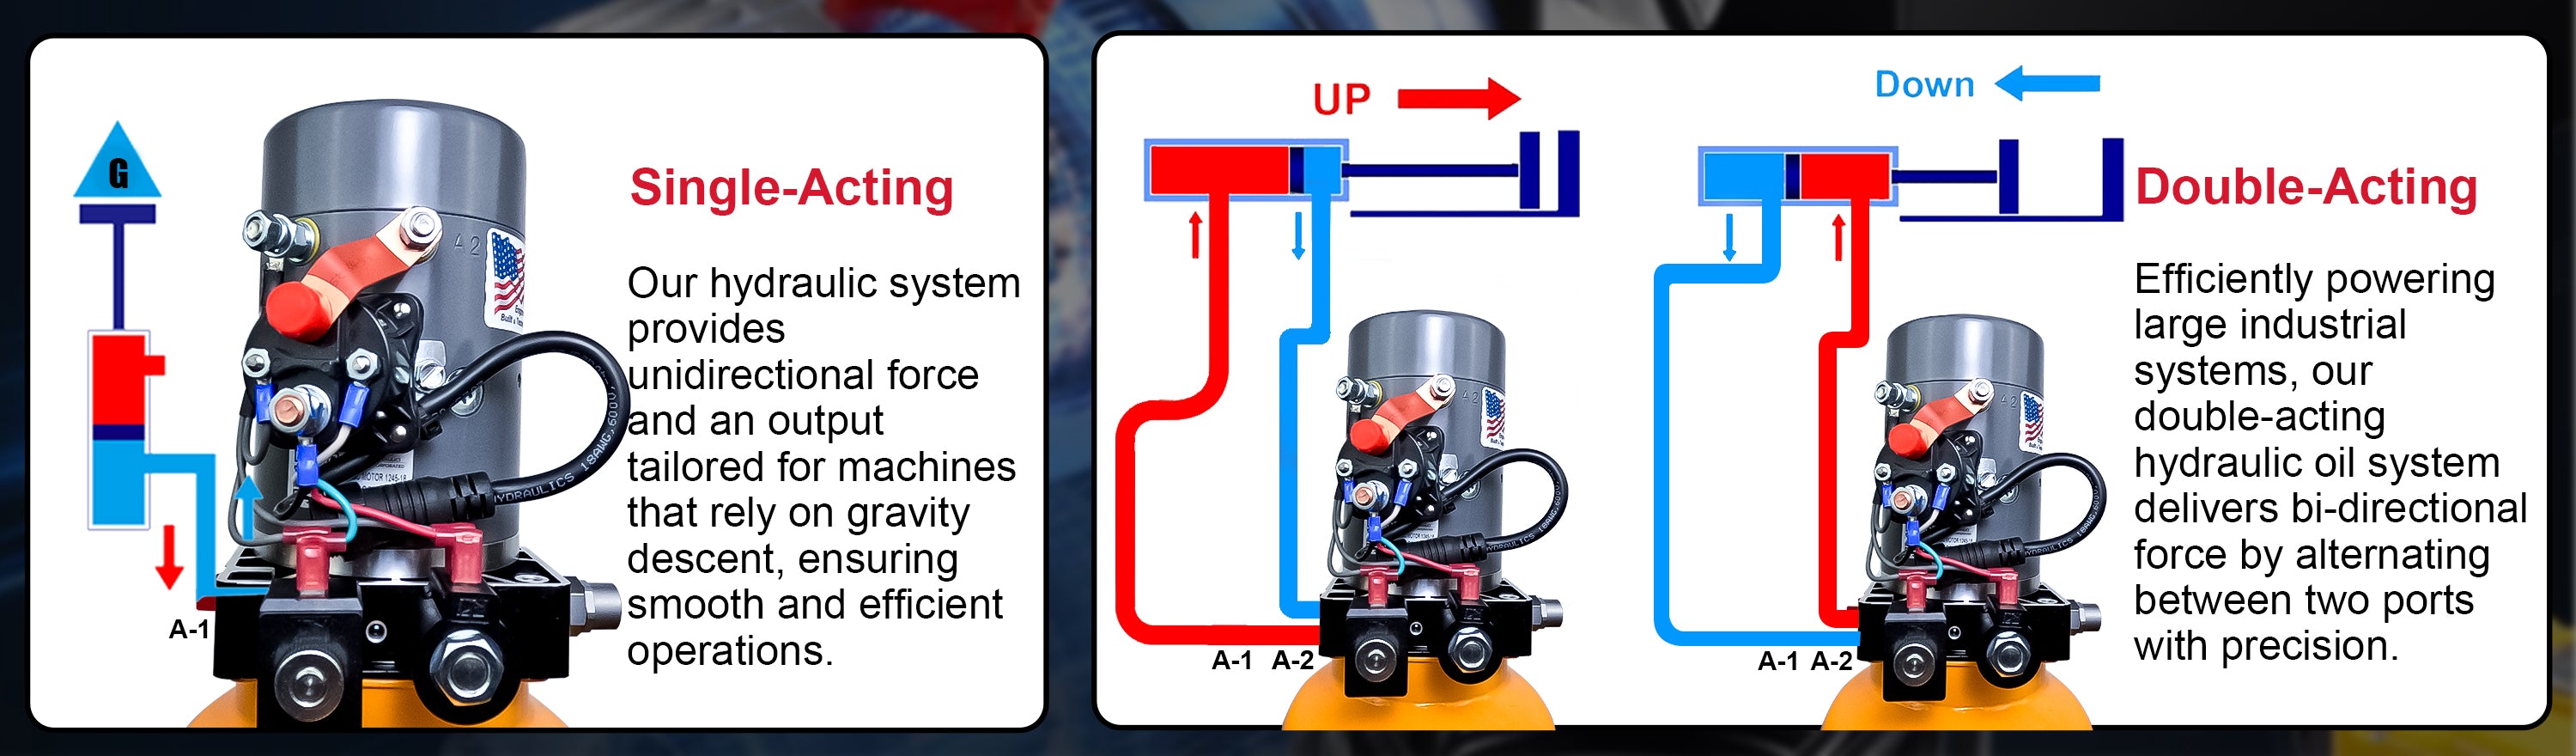 KTI 12V Double-Acting Hydraulic Pump - Steel Reservoir, featuring a detailed machine diagram and close-up views of components, highlighting its robust design and efficient performance.